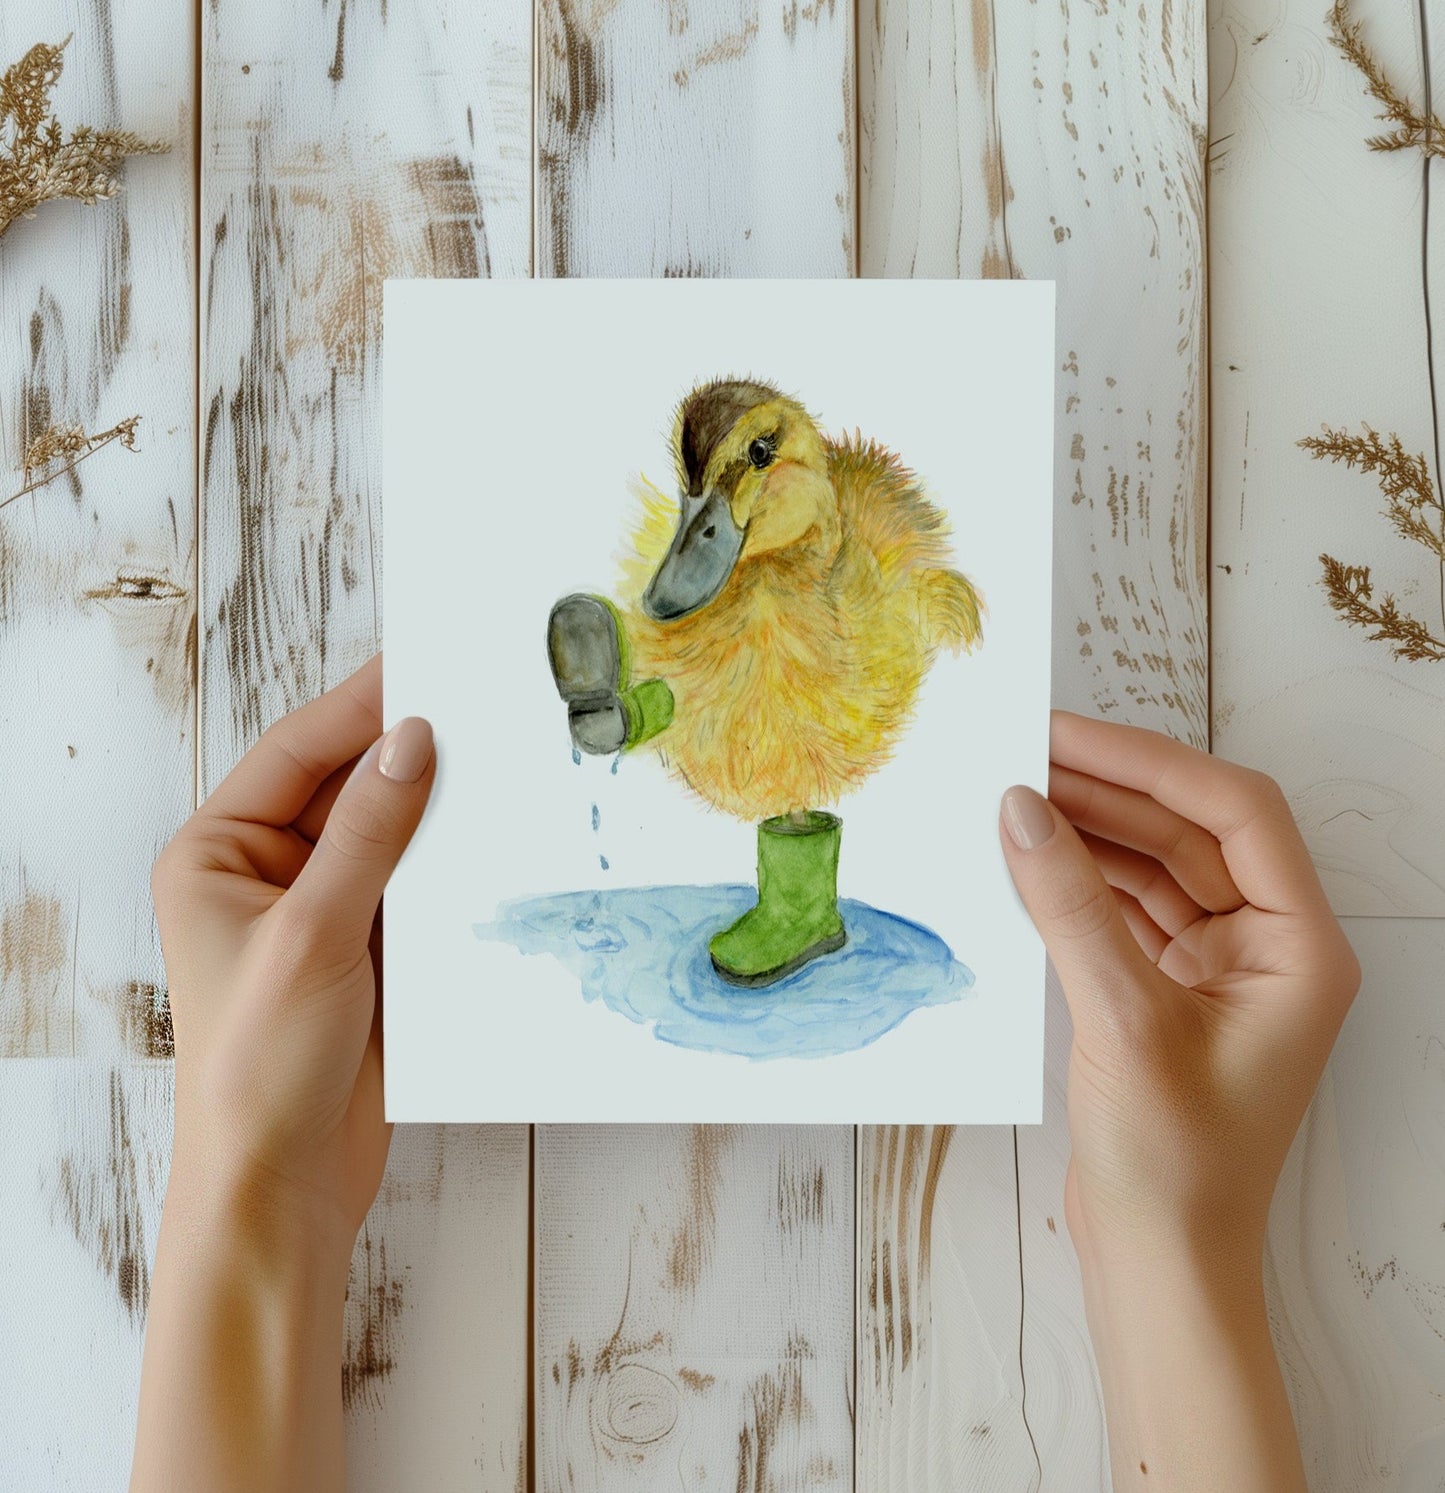 Baby Duckling with Boots on - Lora Cavallin Art